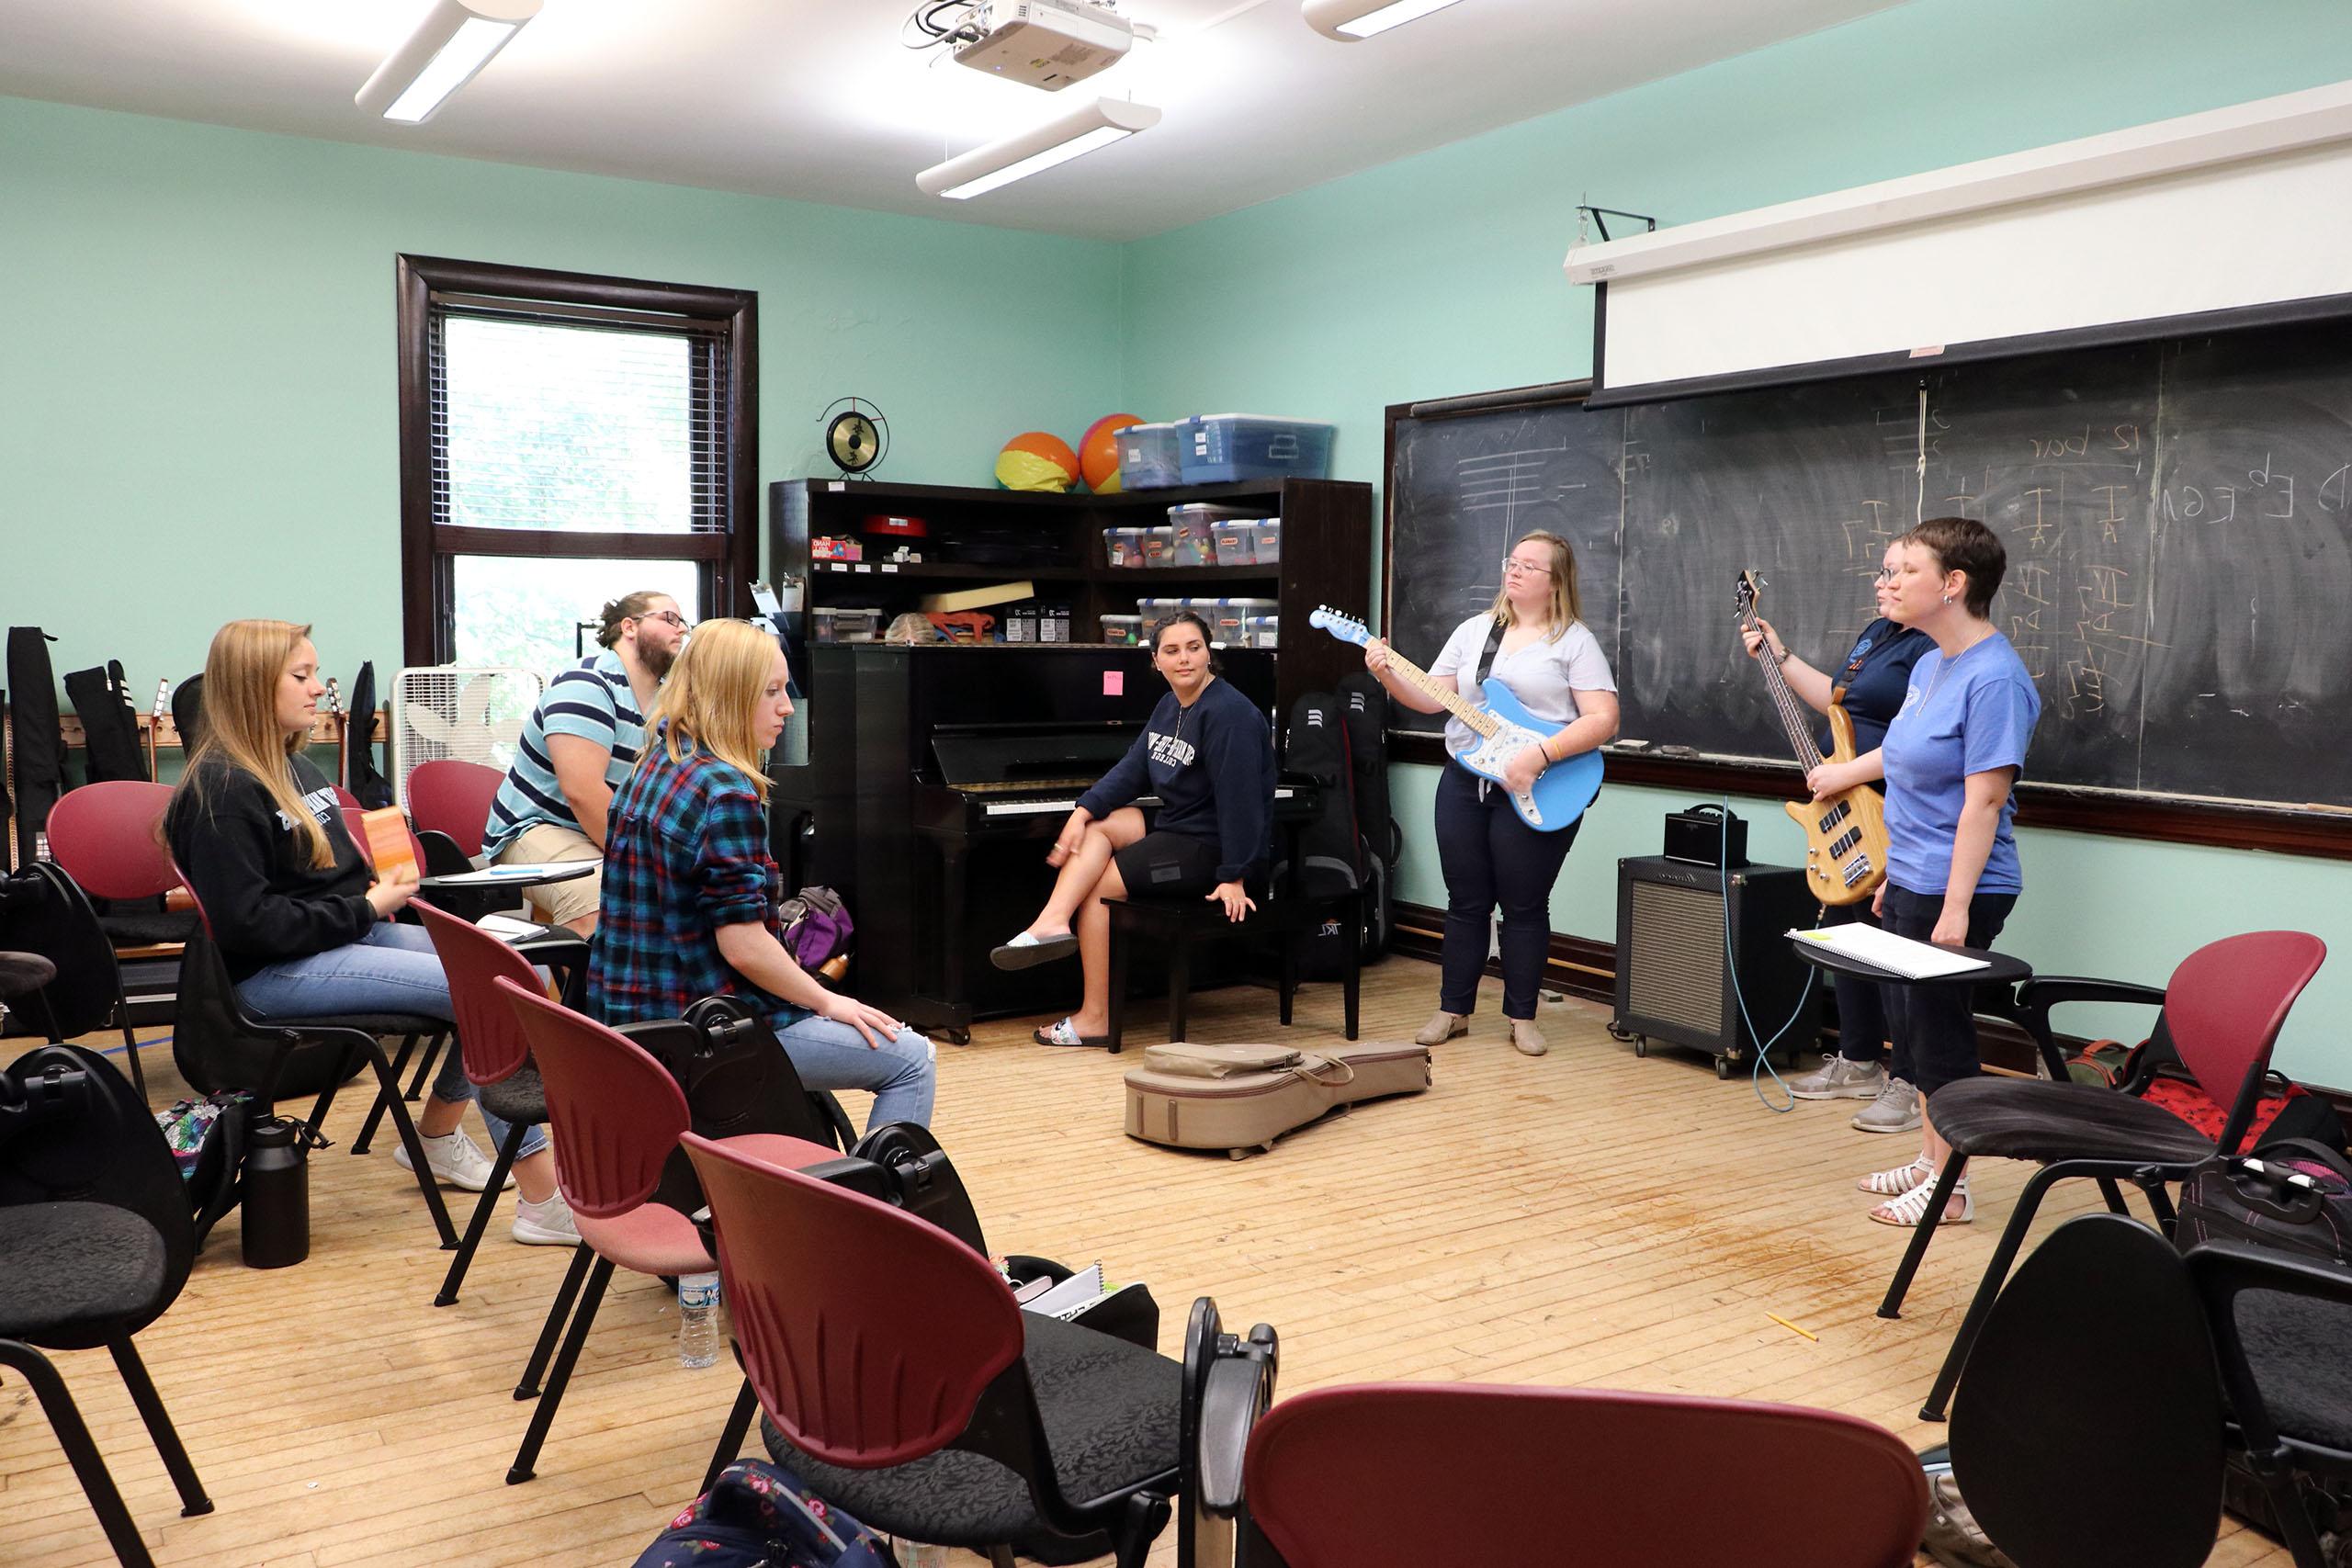 A music class with two people playing guitars, a student singing, and four students listening